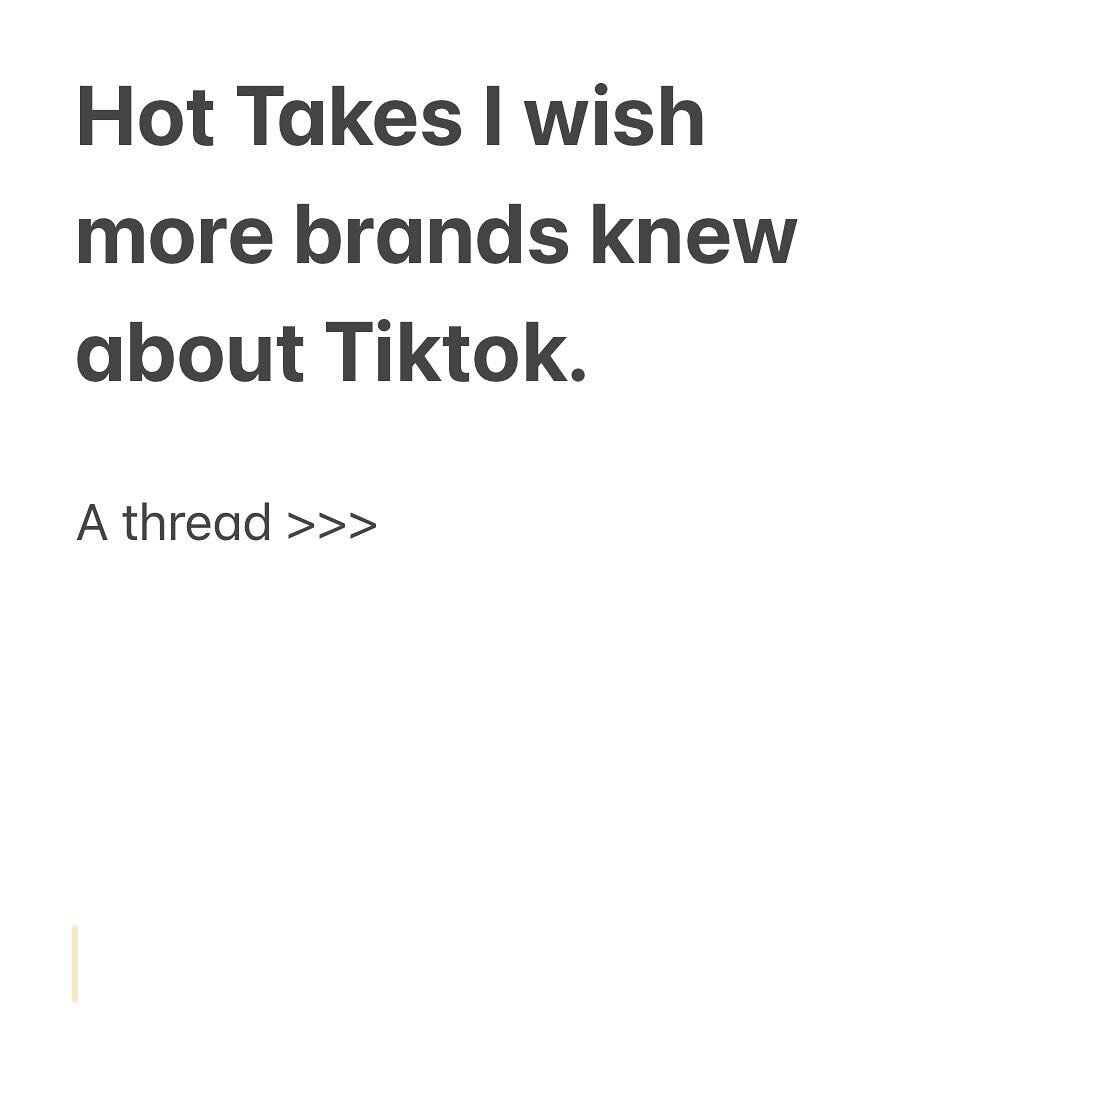 Brands are feeling the pressure of tiktok, under the assumptions that they&hellip;
- have to post 3x a day
- have to hop on every trend
- have to post office culture

I&rsquo;m here to gently remind you that the brands that are doing well, aren&rsquo